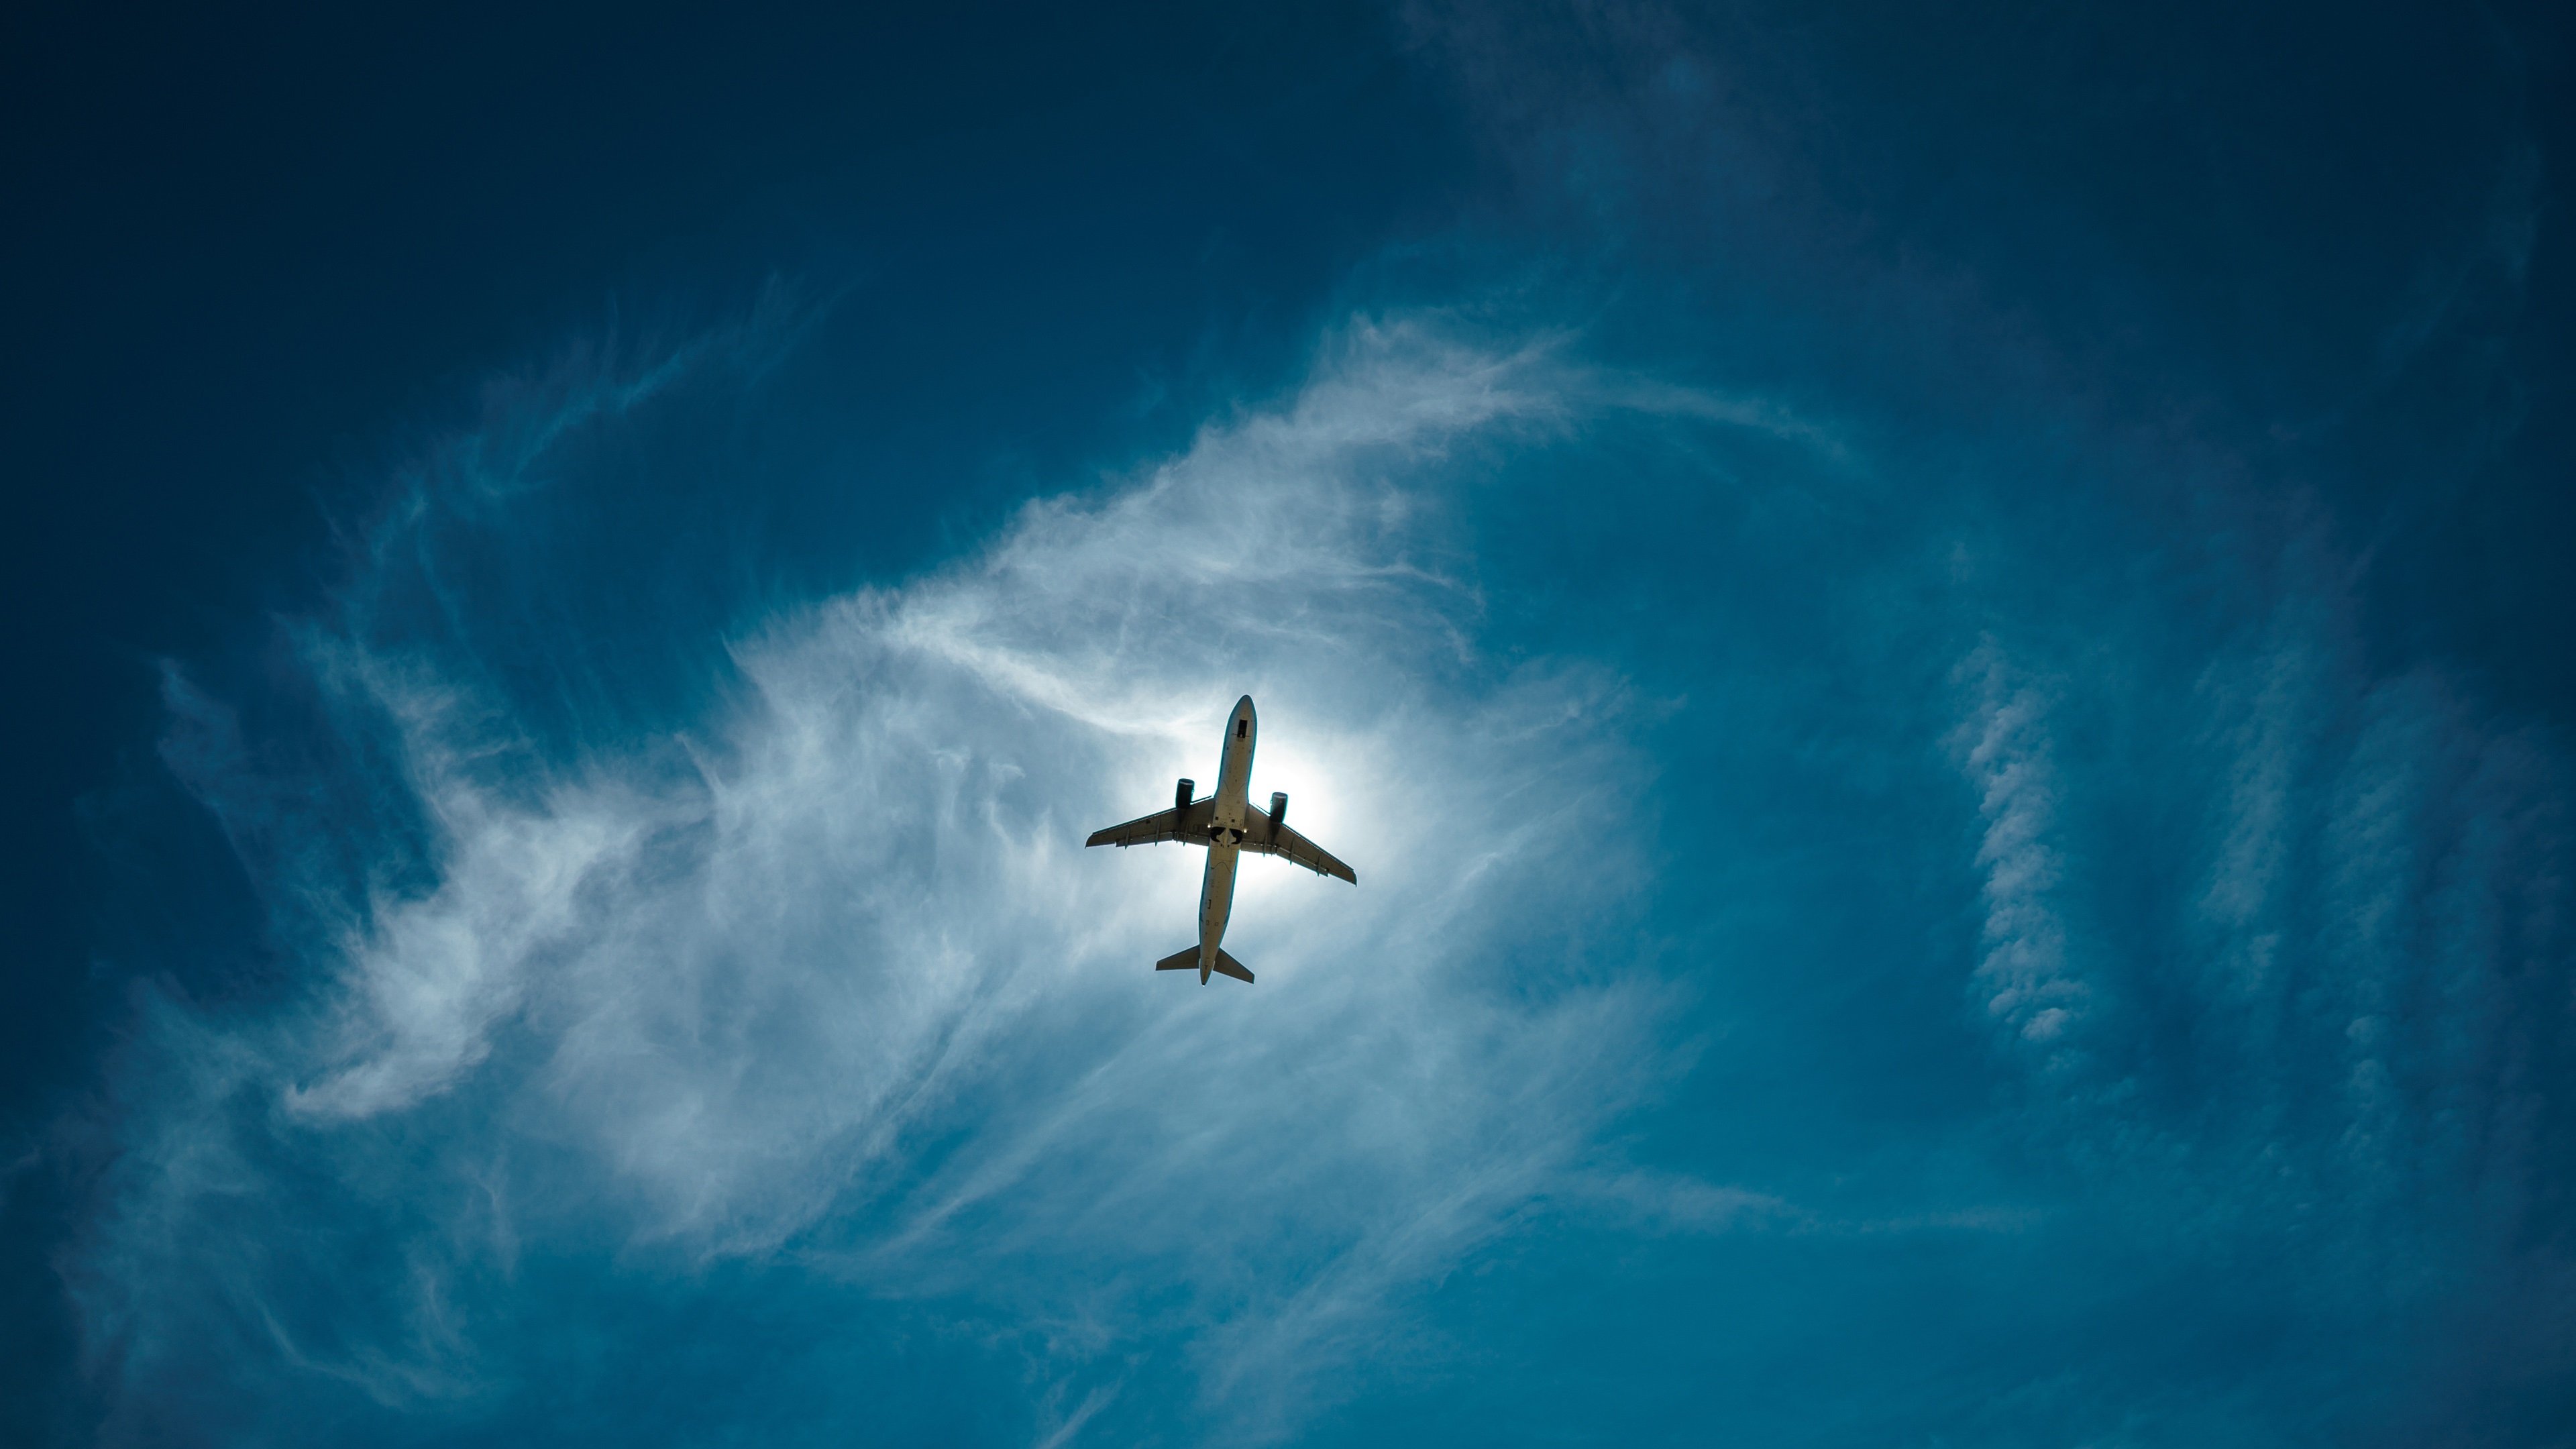 Airplane-from-bottom-view-sky-clouds-flight_3840x2160.jpg